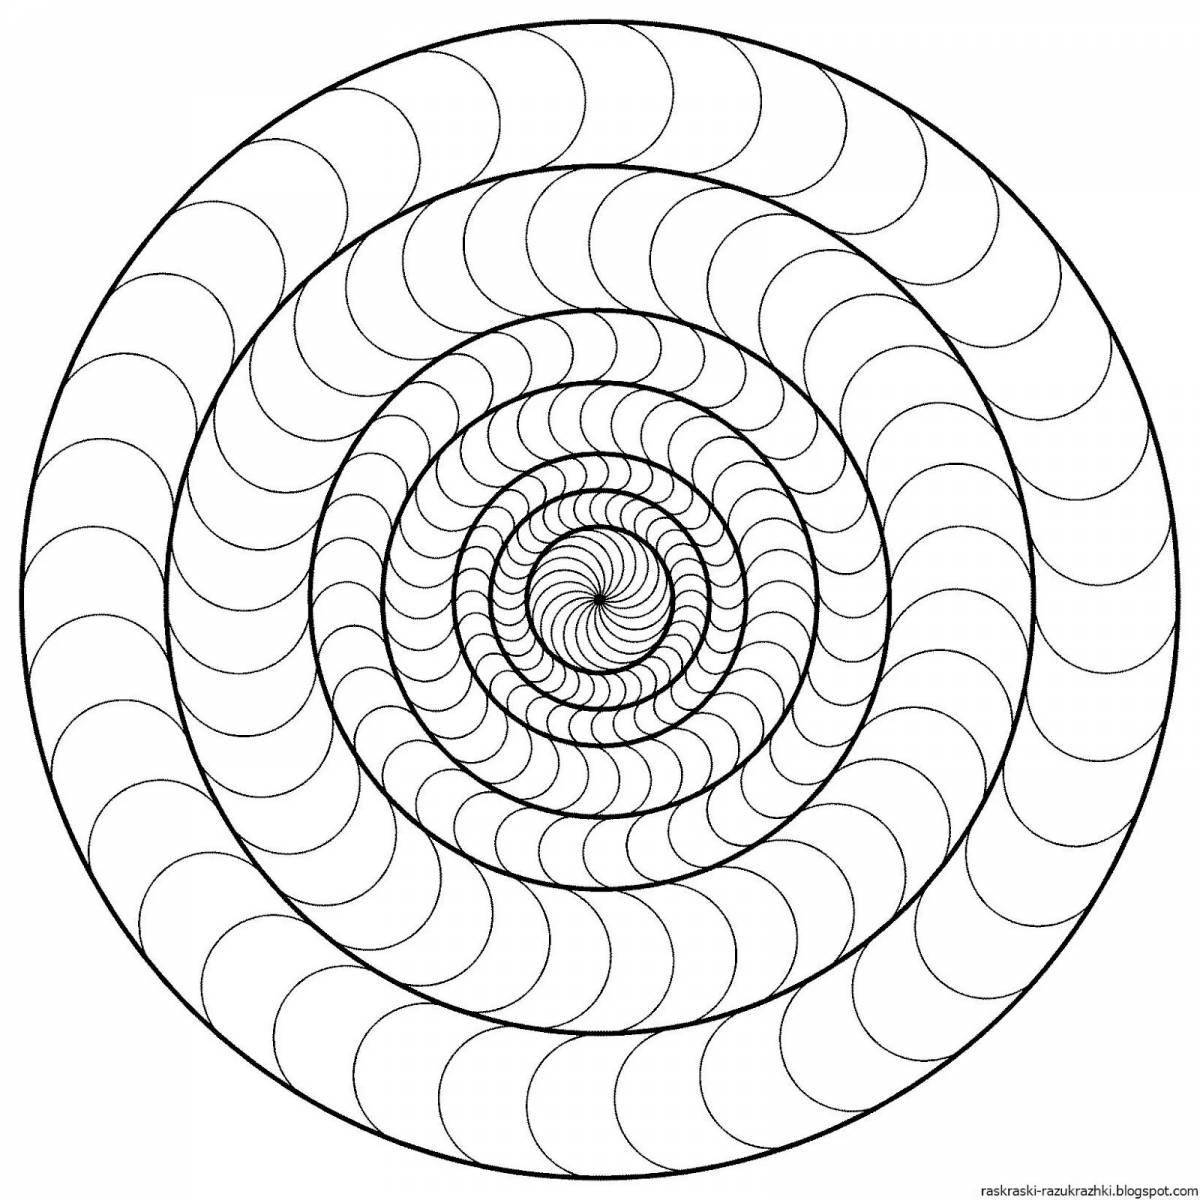 Coloring book twisted spiral